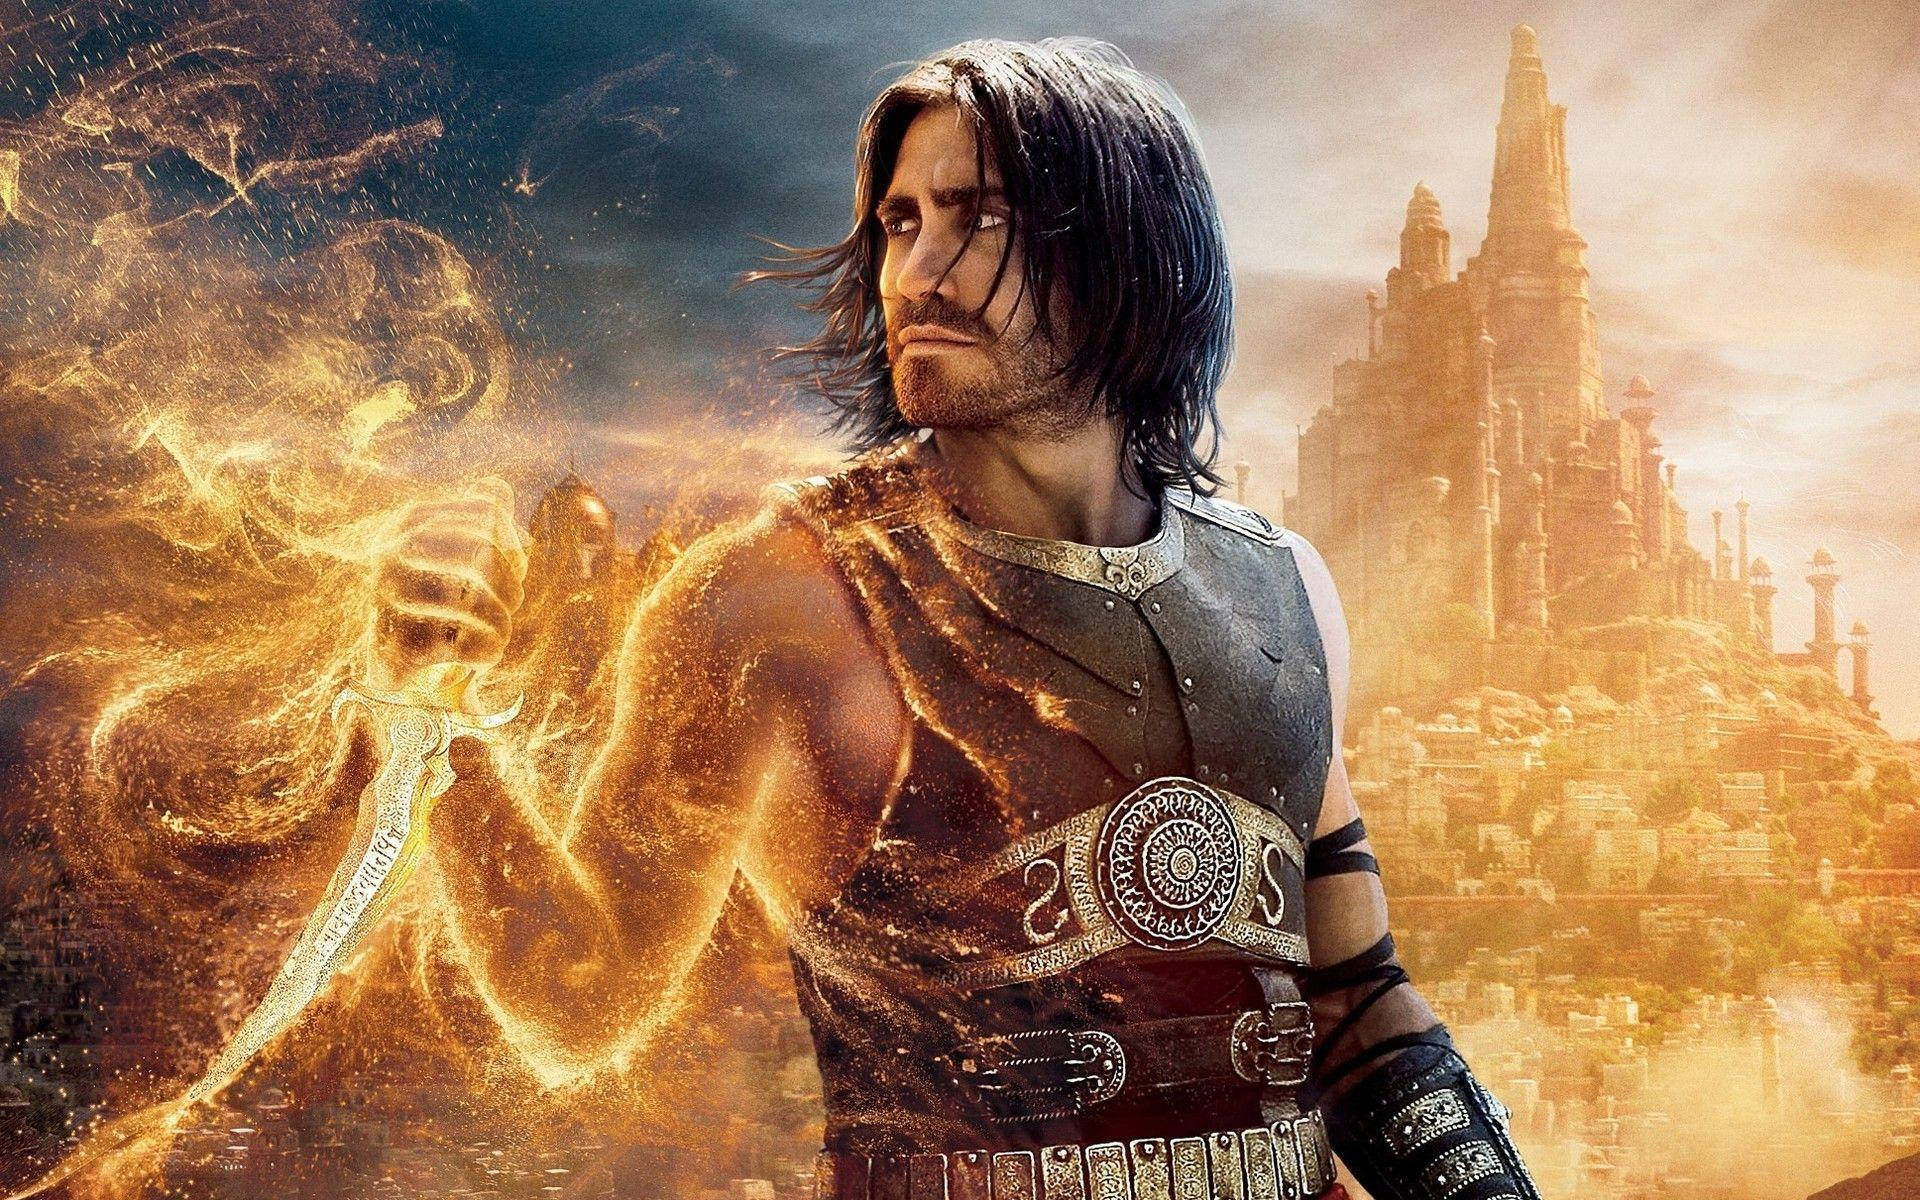 Prince Of Persia Pictures